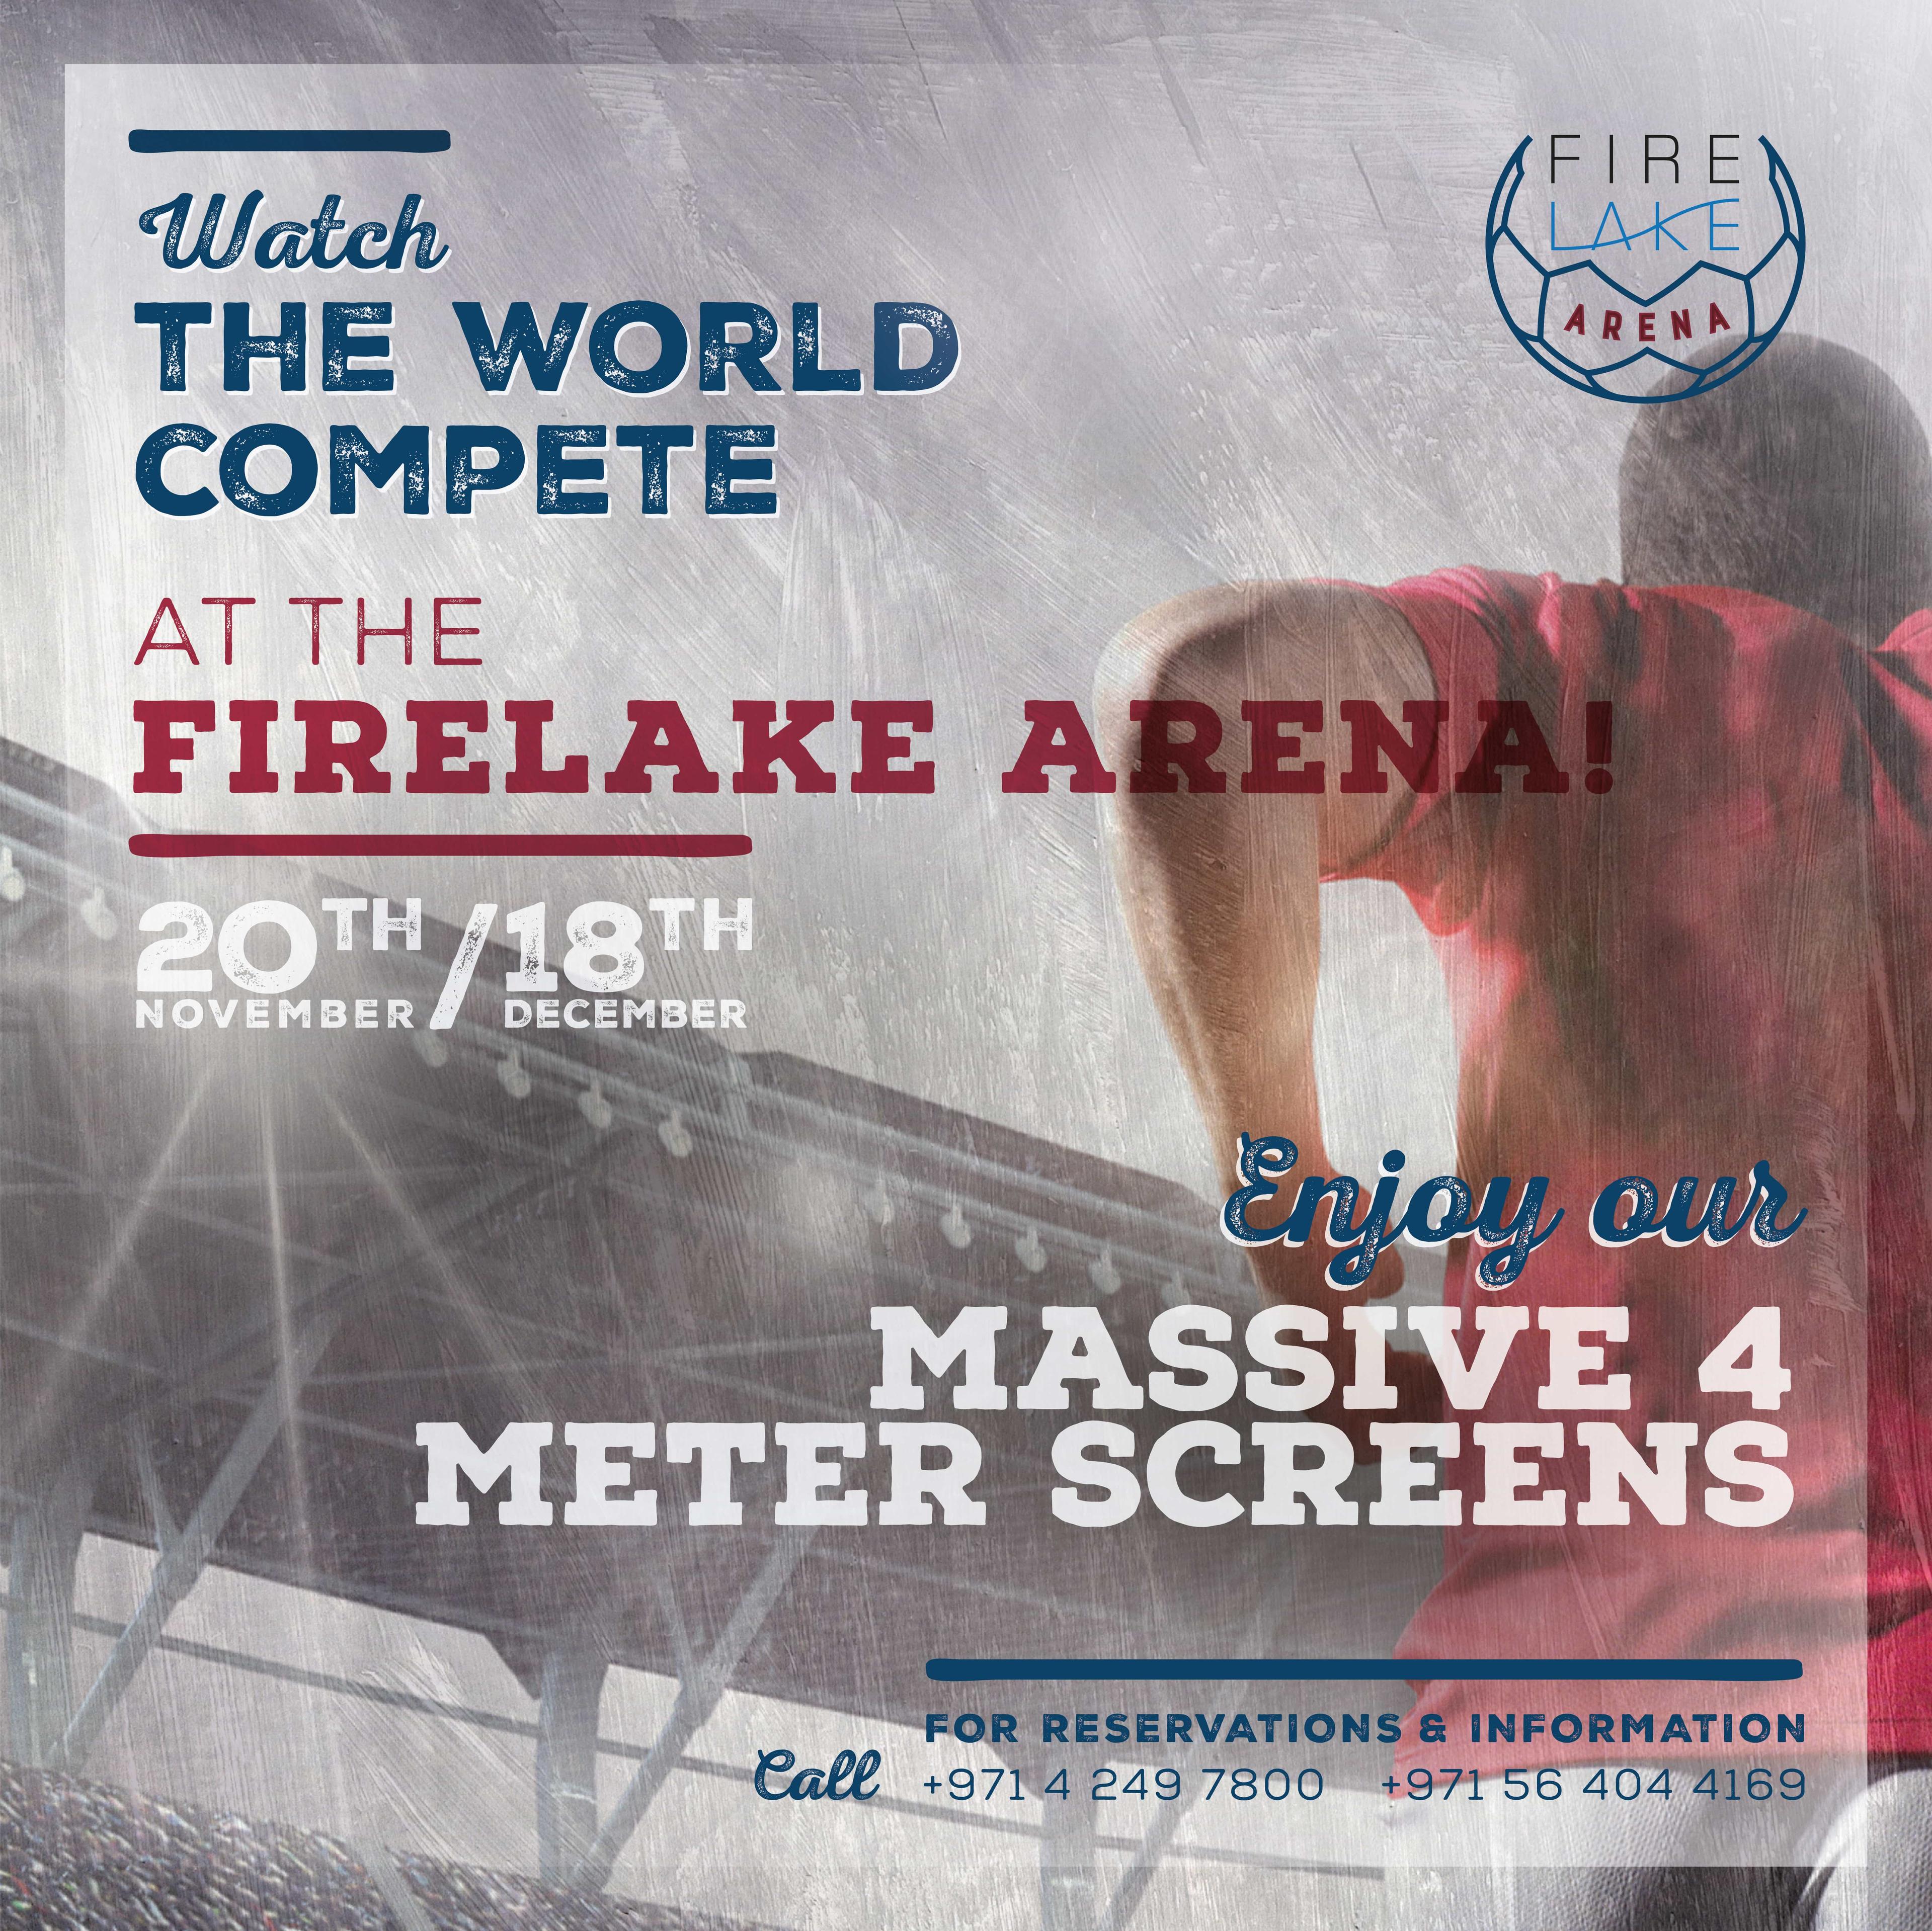 Watch the World Compete at The Firelake Arena